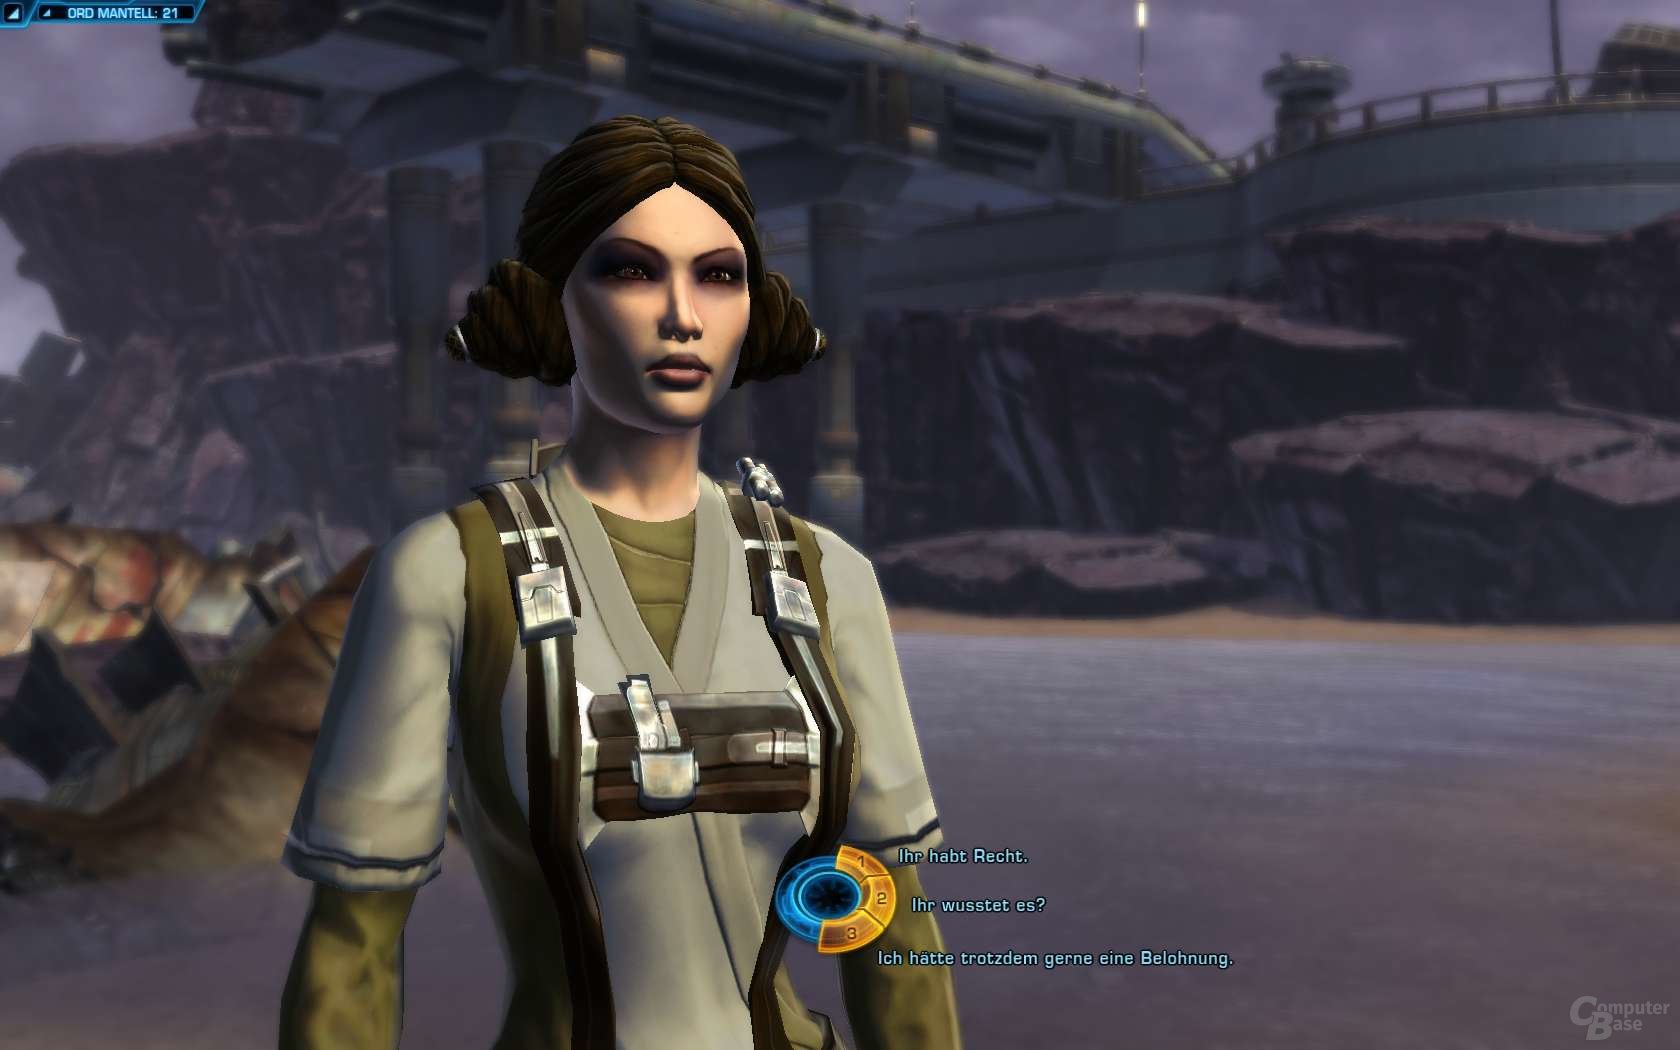 Dialog in SWTor